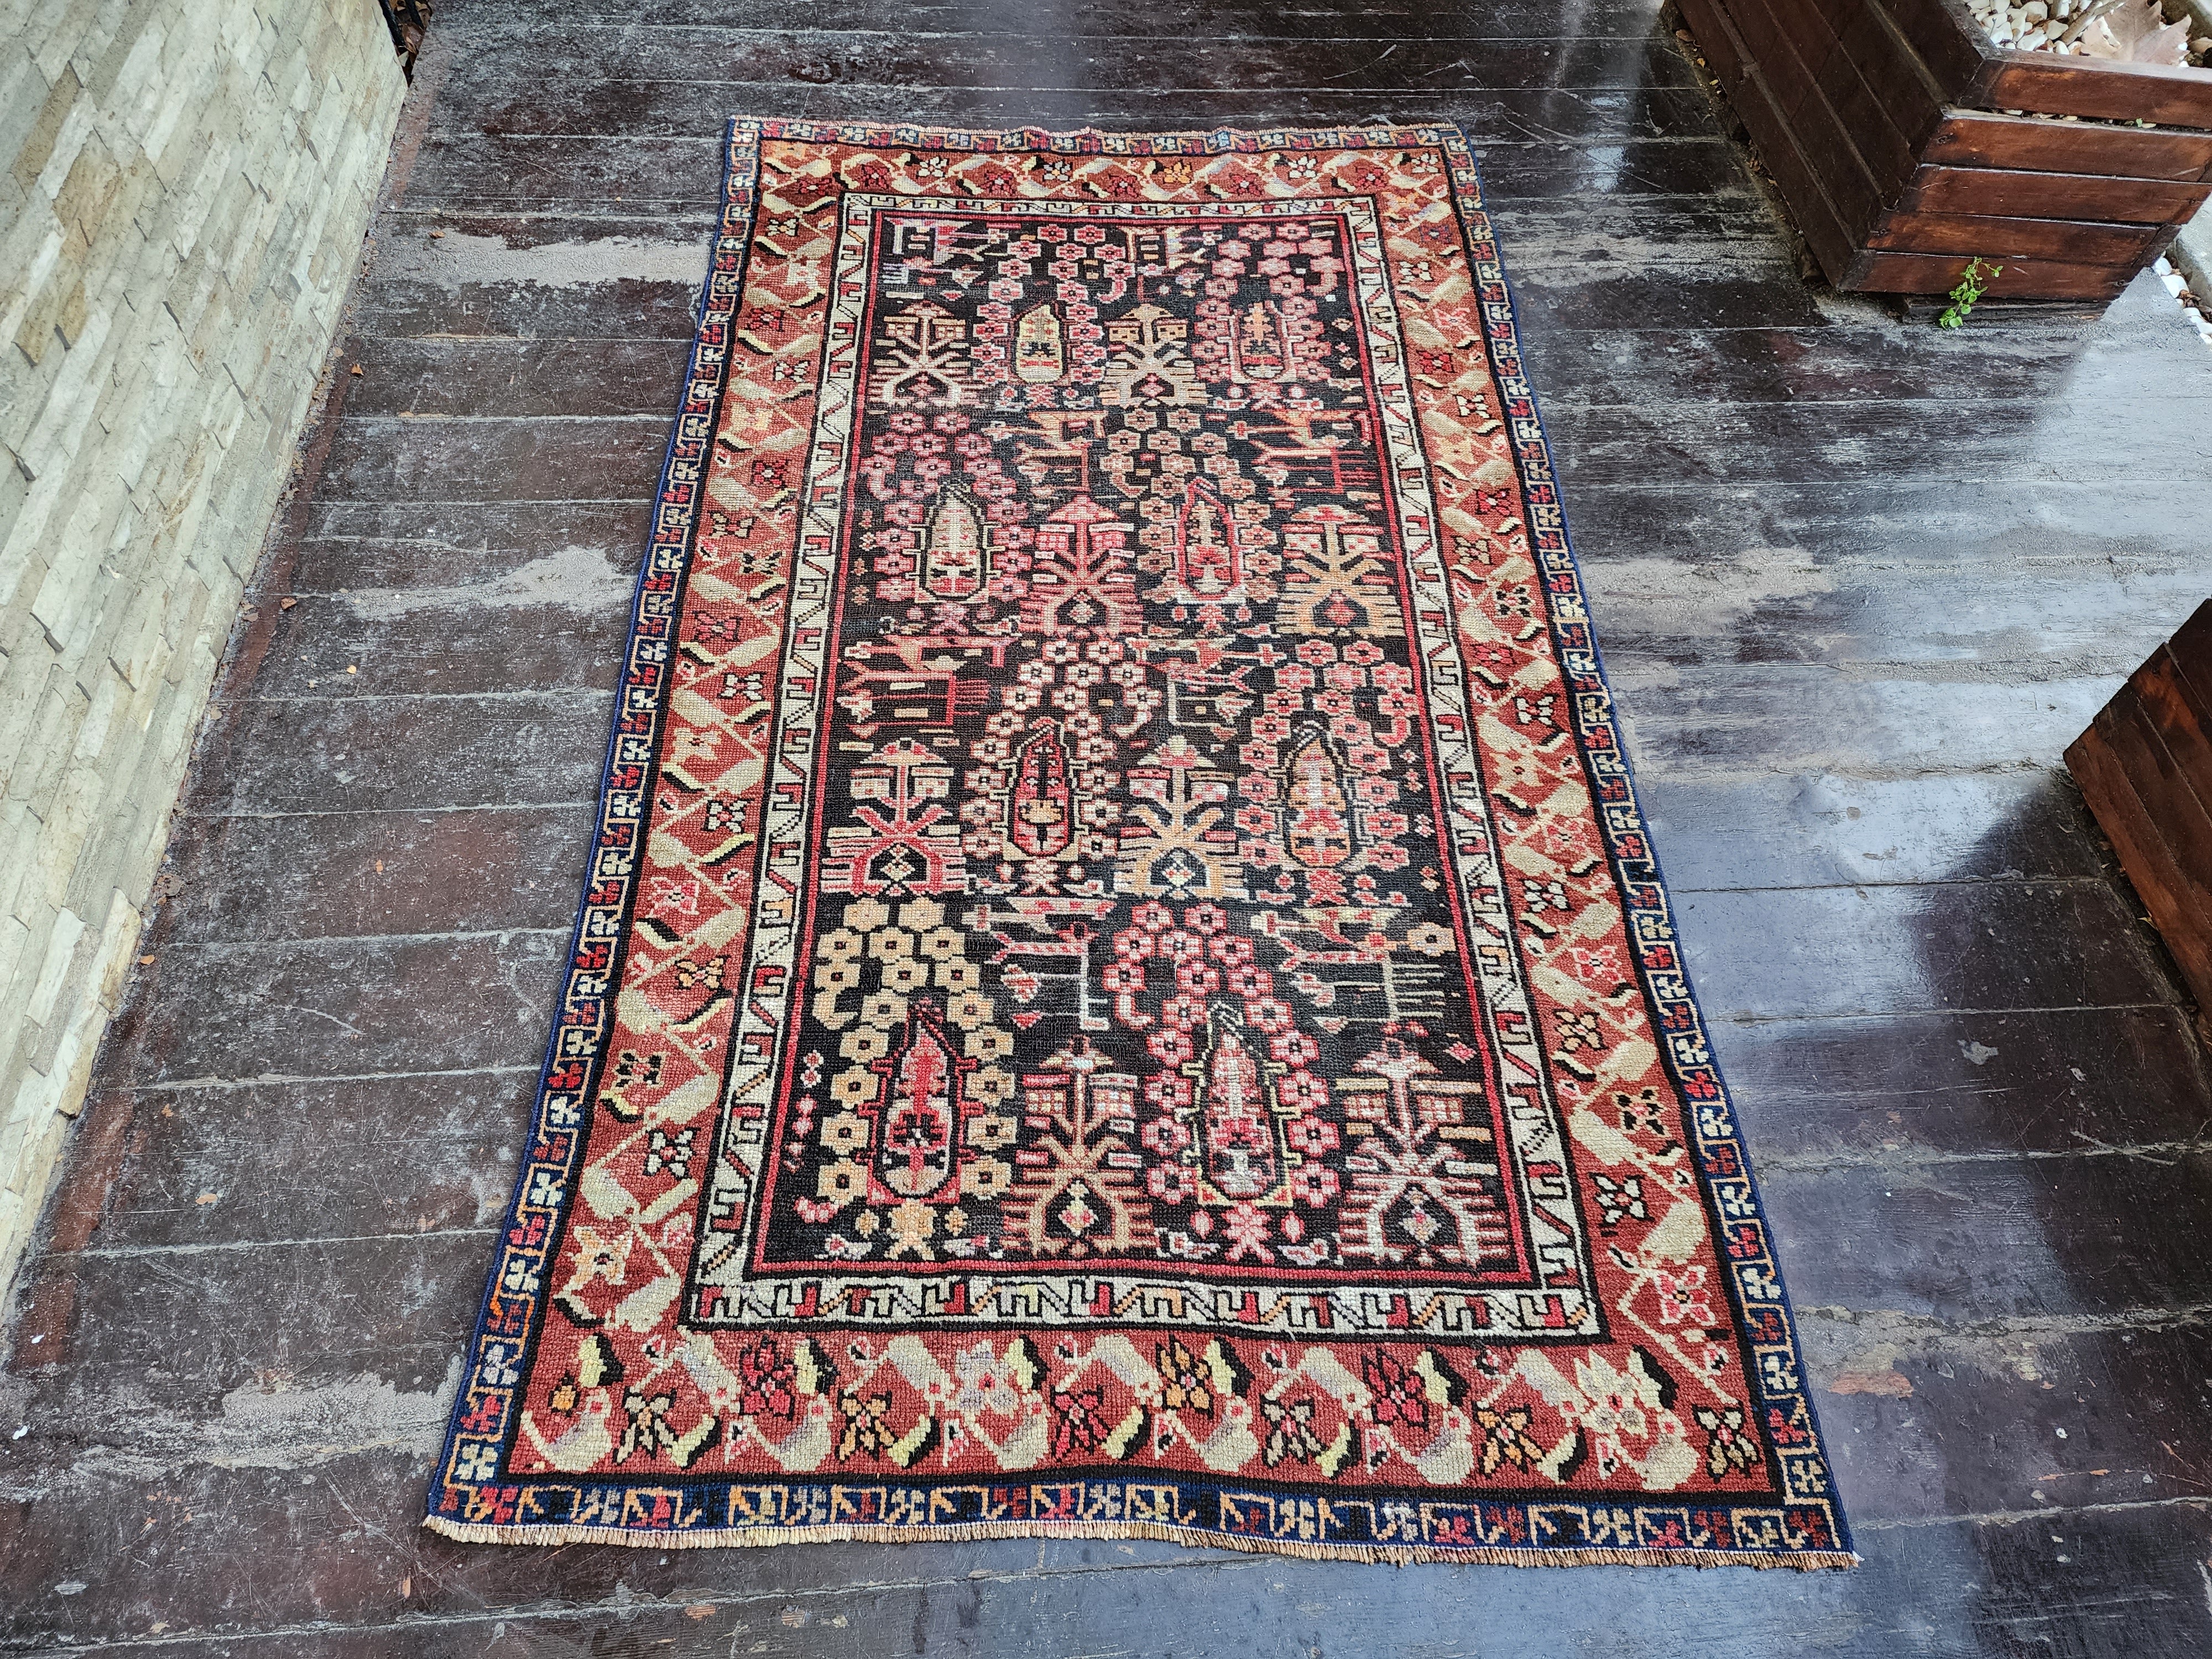 Antique Cacuasion Rug 6 ft 1 in x 3 ft 5 in, Red, Blue and White Floral Design Turkish Small Runner Rug Handmade fron Natural Wool